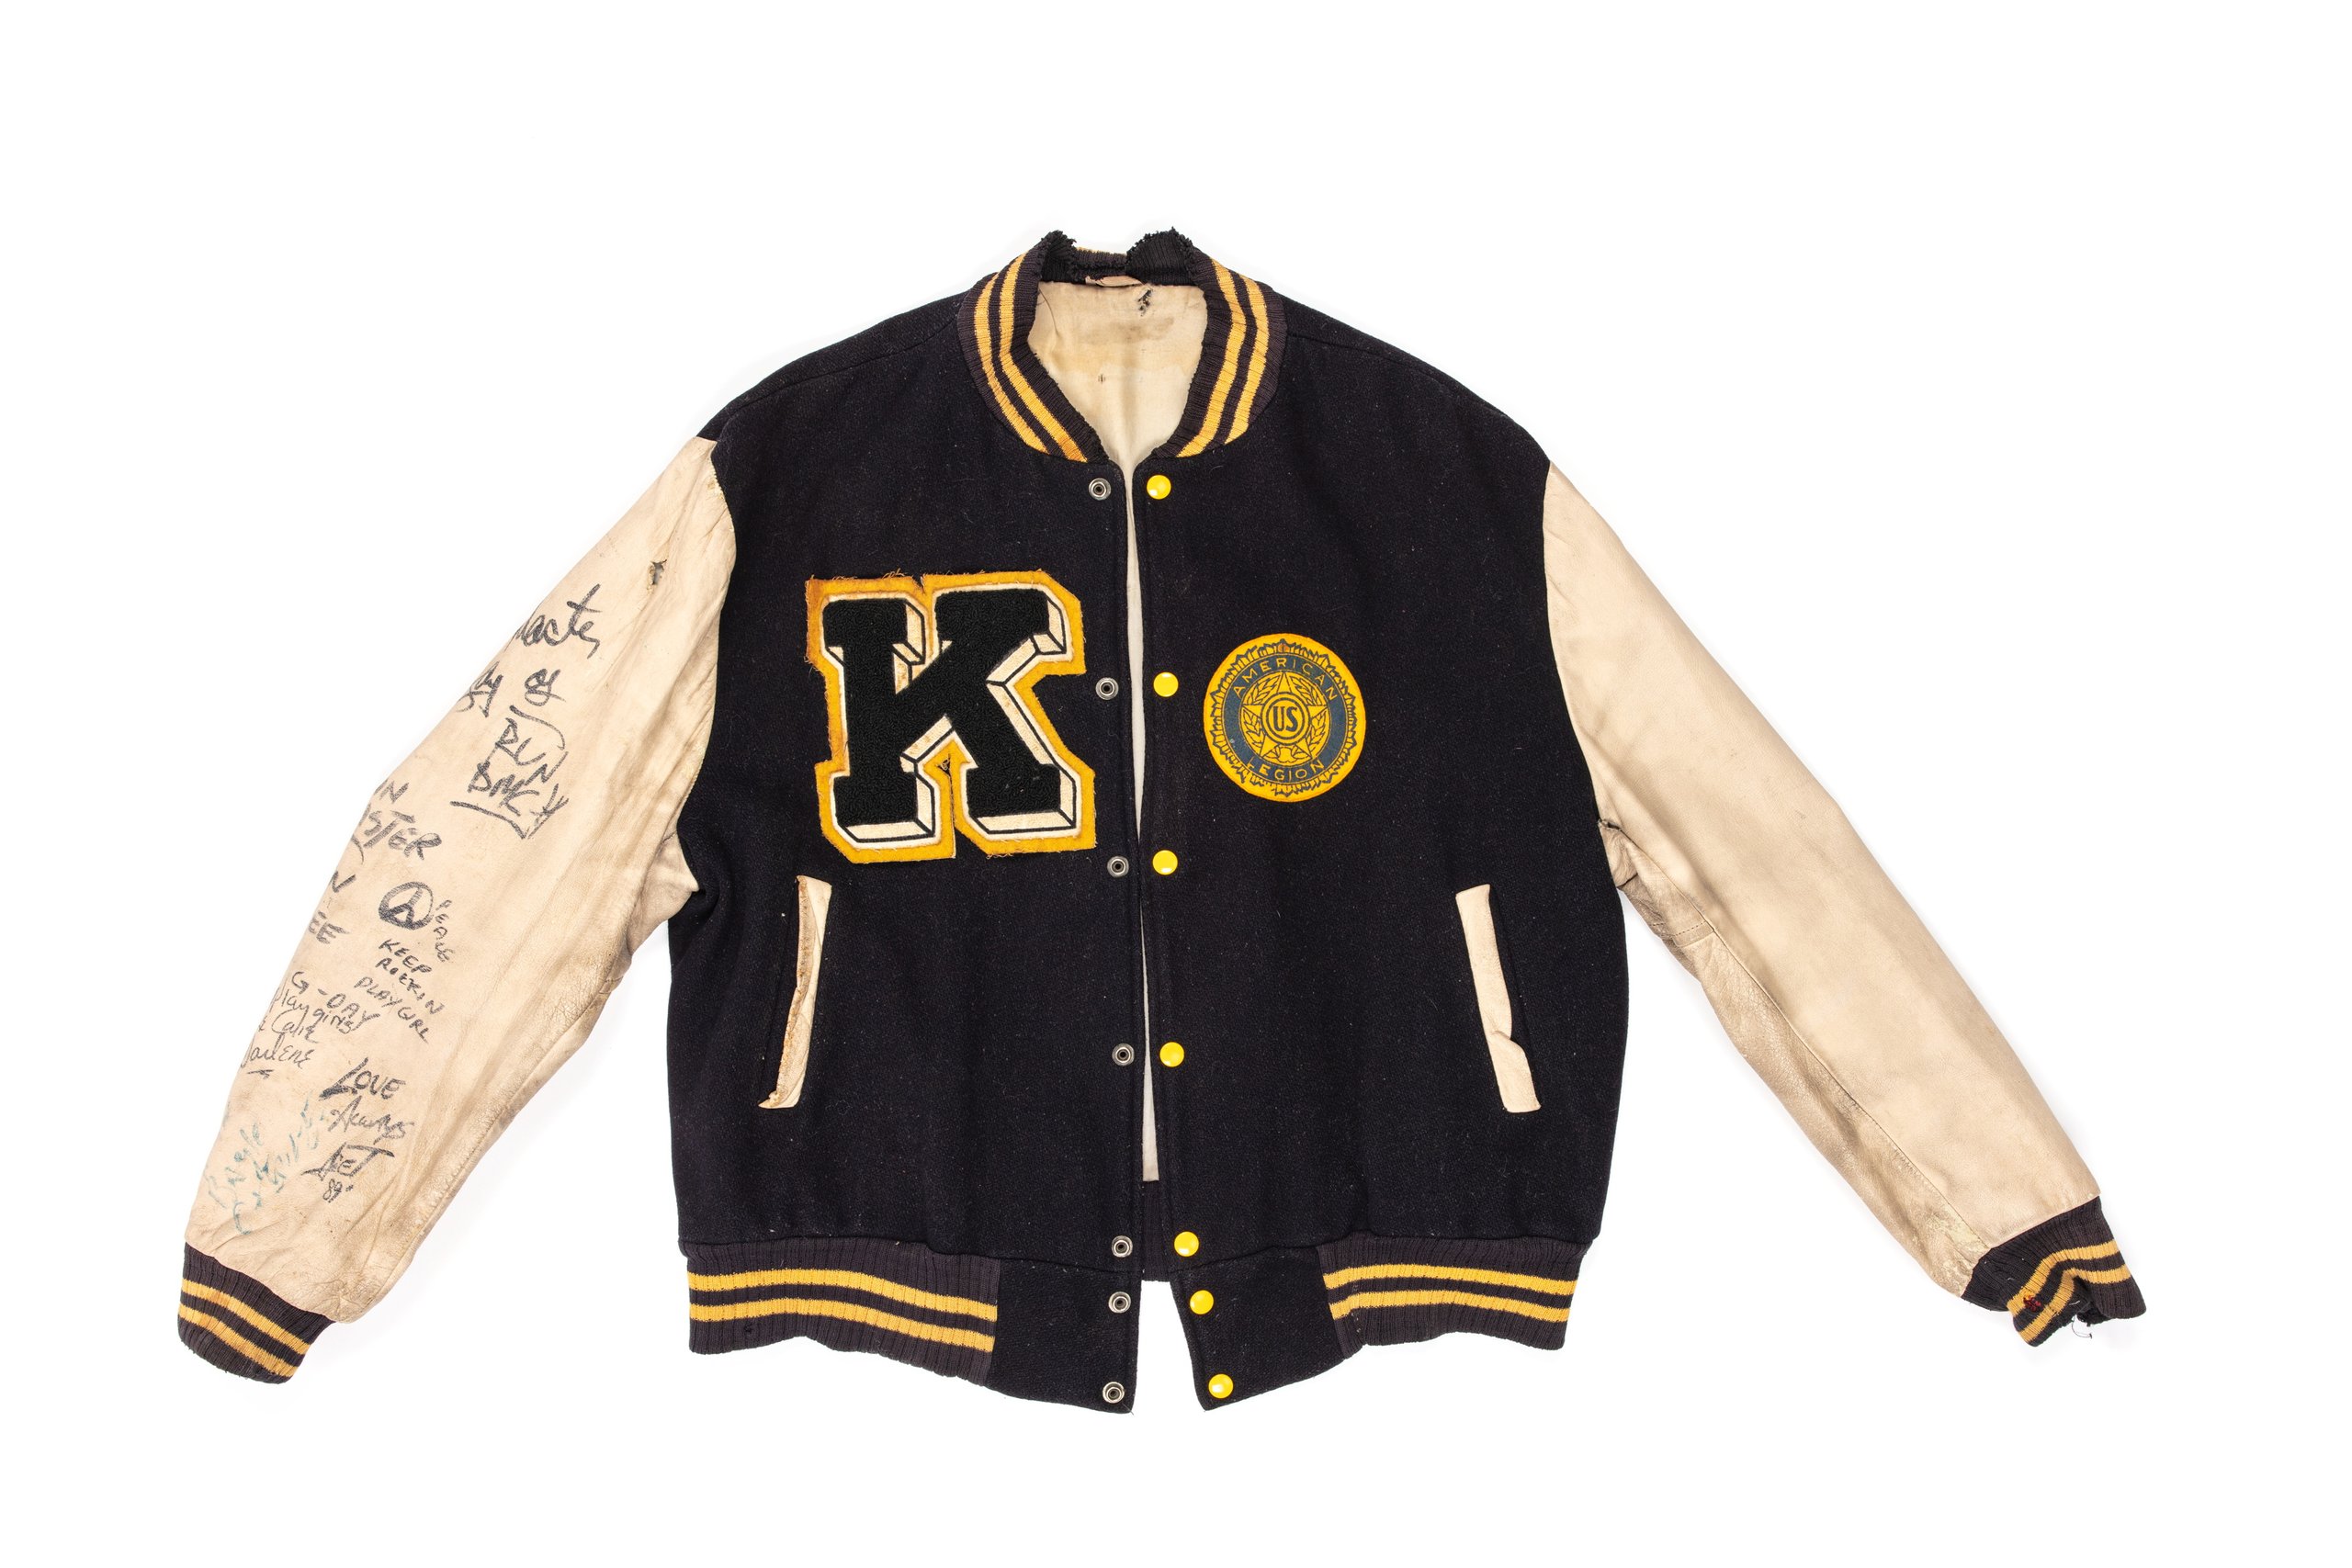 Autographed letterman jacket worn by Spice